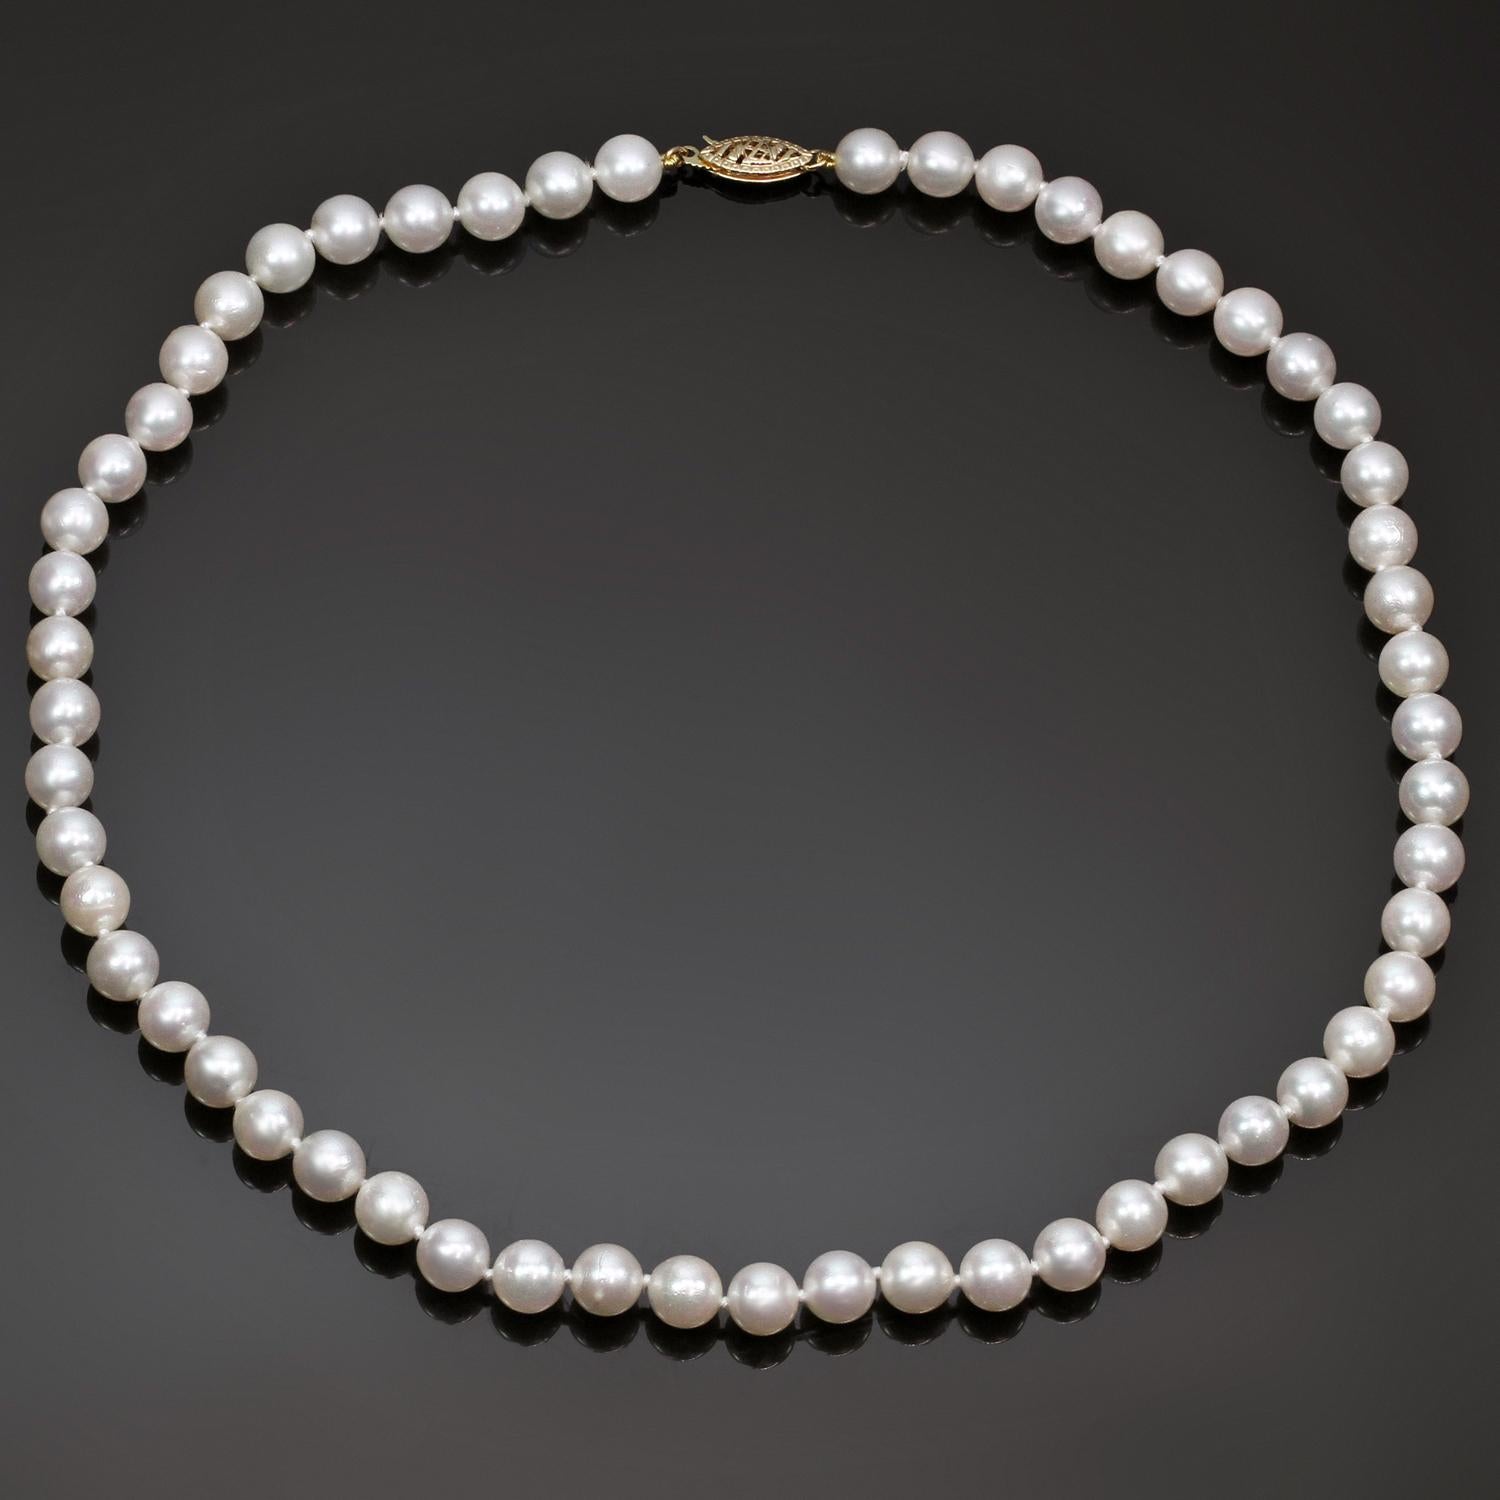 A classic strand of 7.0mm genuine round cultured pearls in pinkish-white color and high luster, an even selection with very little imperfections. Completed by a ornamental filigree clasp in 14k yellow gold. Measurements: 0.27